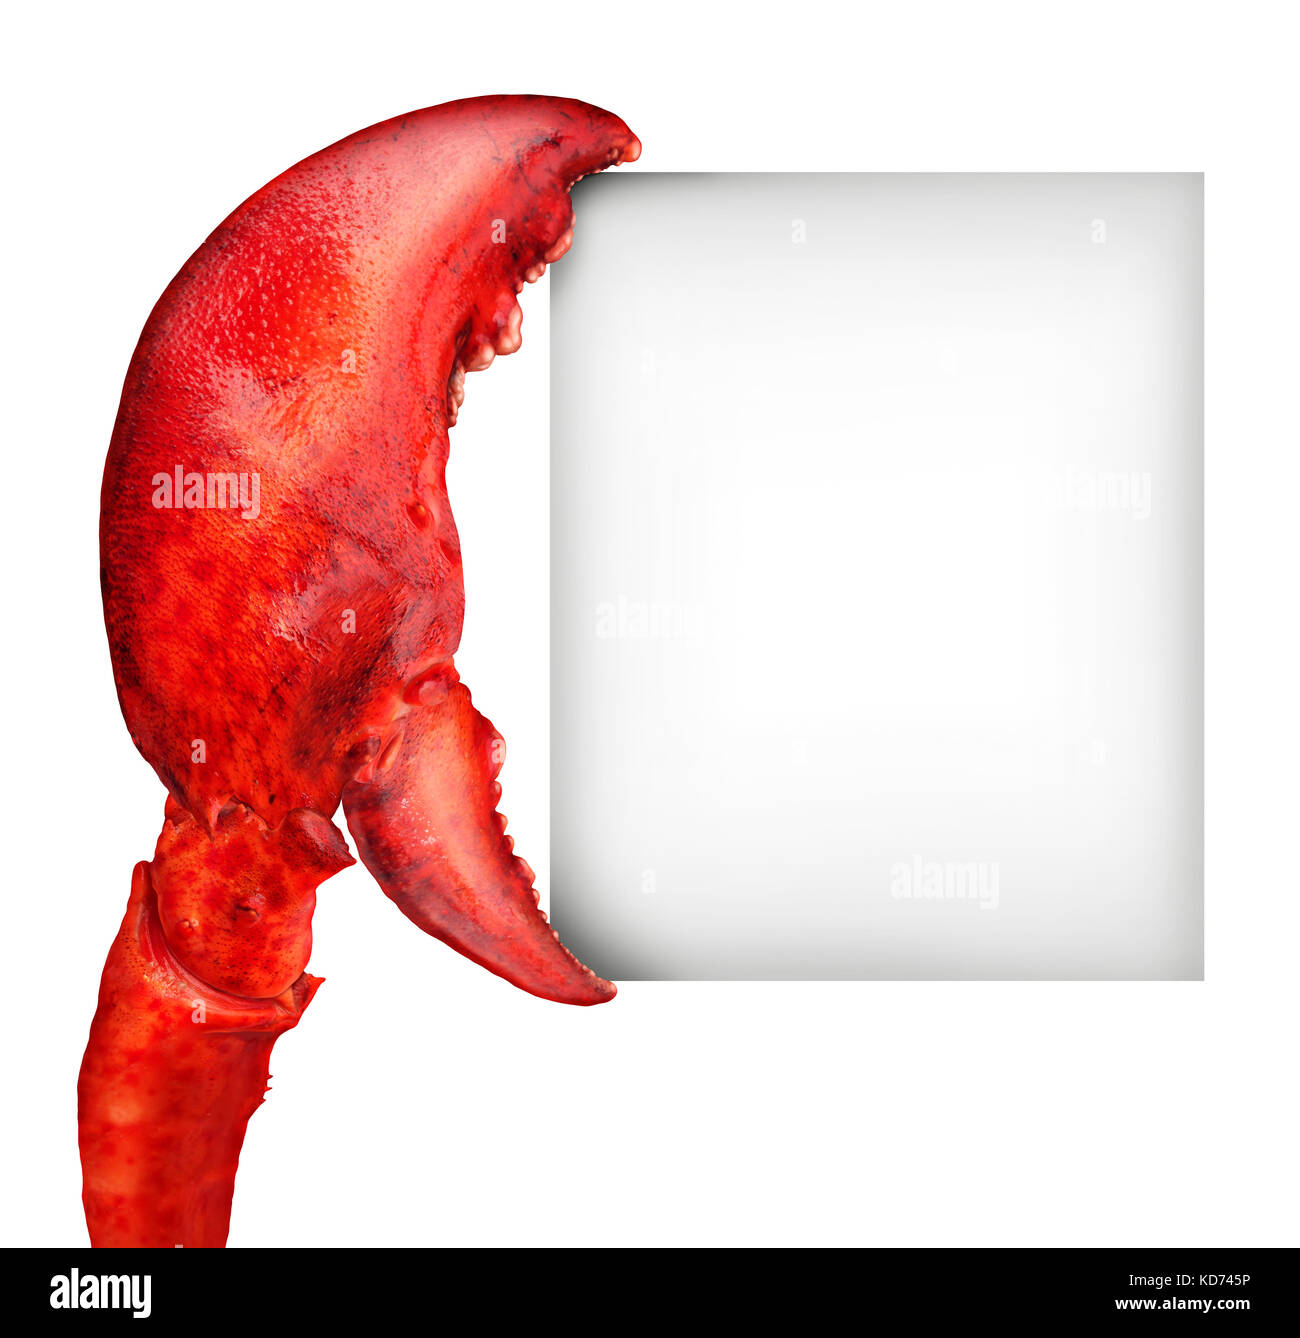 Lobster claw blank sign holding a card banner as a fresh seafood message or shellfish food concept with a red shell crustacean. Stock Photo